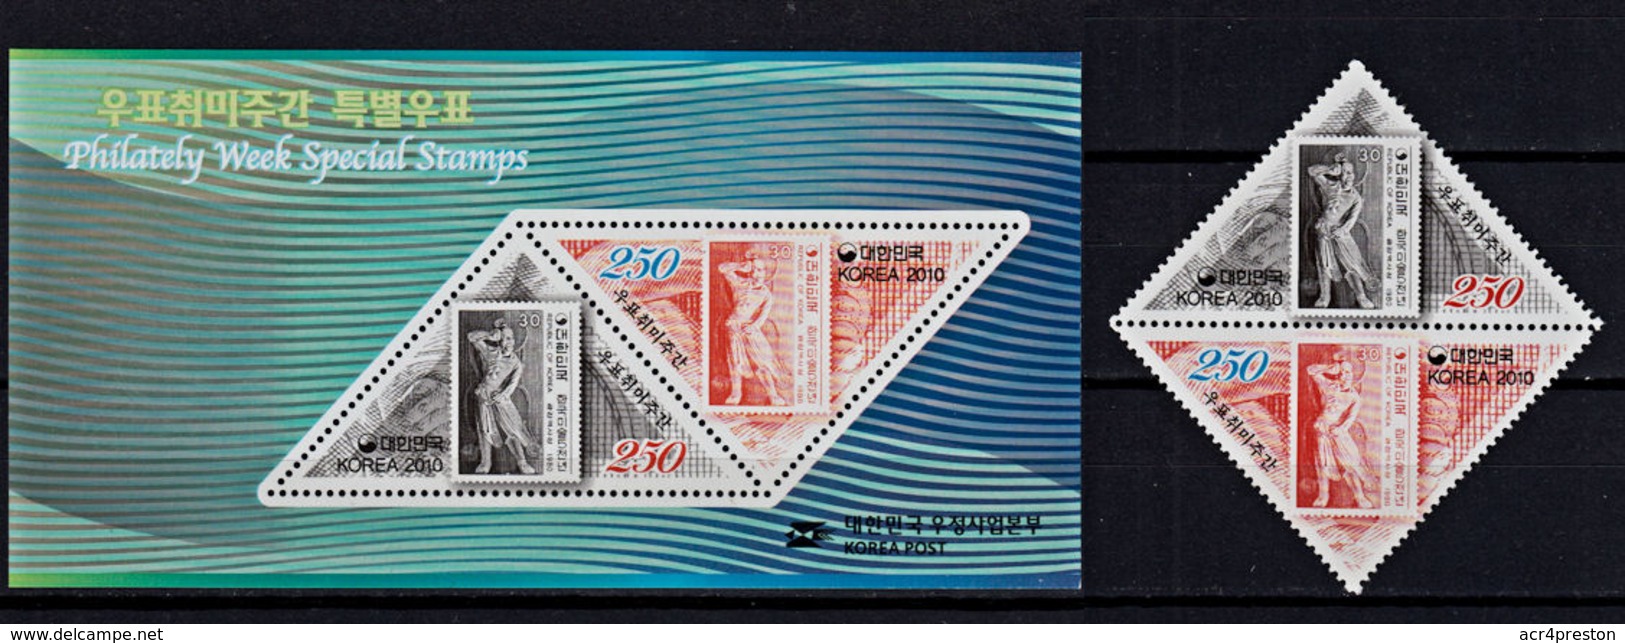 A1226 SOUTH KOREA 2010, Philately Week Special Stamps,  MNH - Korea, South